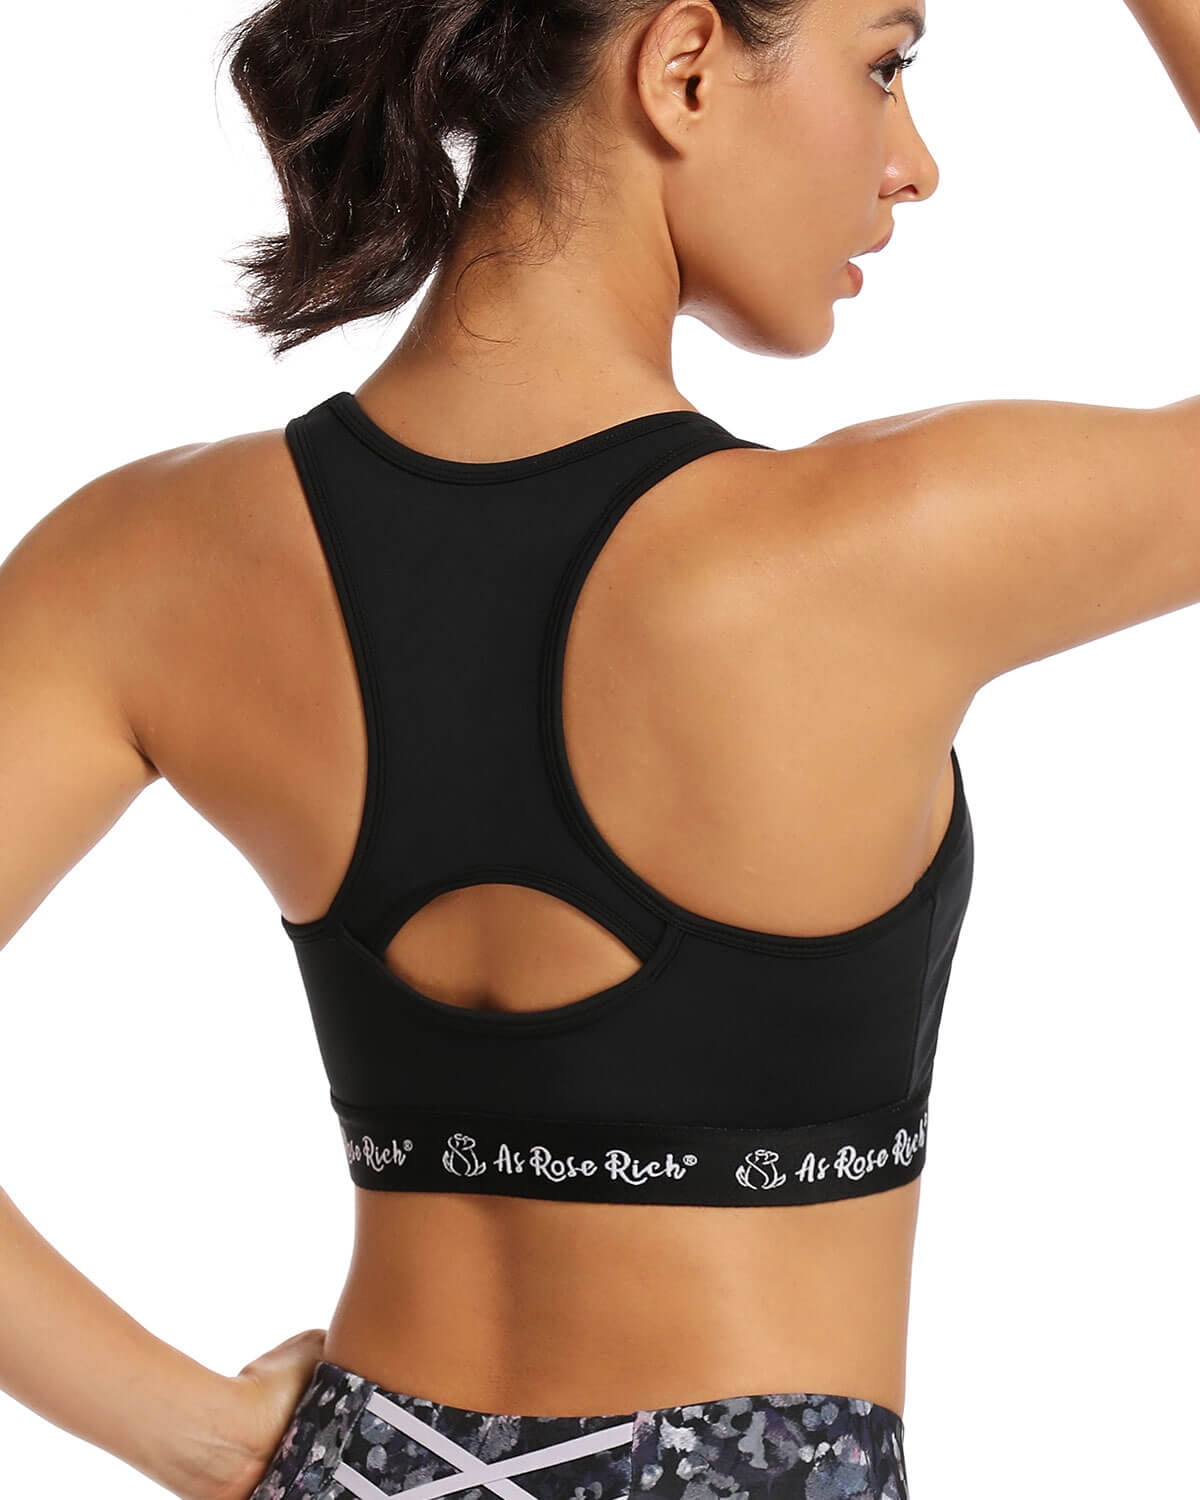 Dance Support Medium Support Sports Bras for Women Comfort for Gym Yoga AS ROSE RICH Sports Bra 